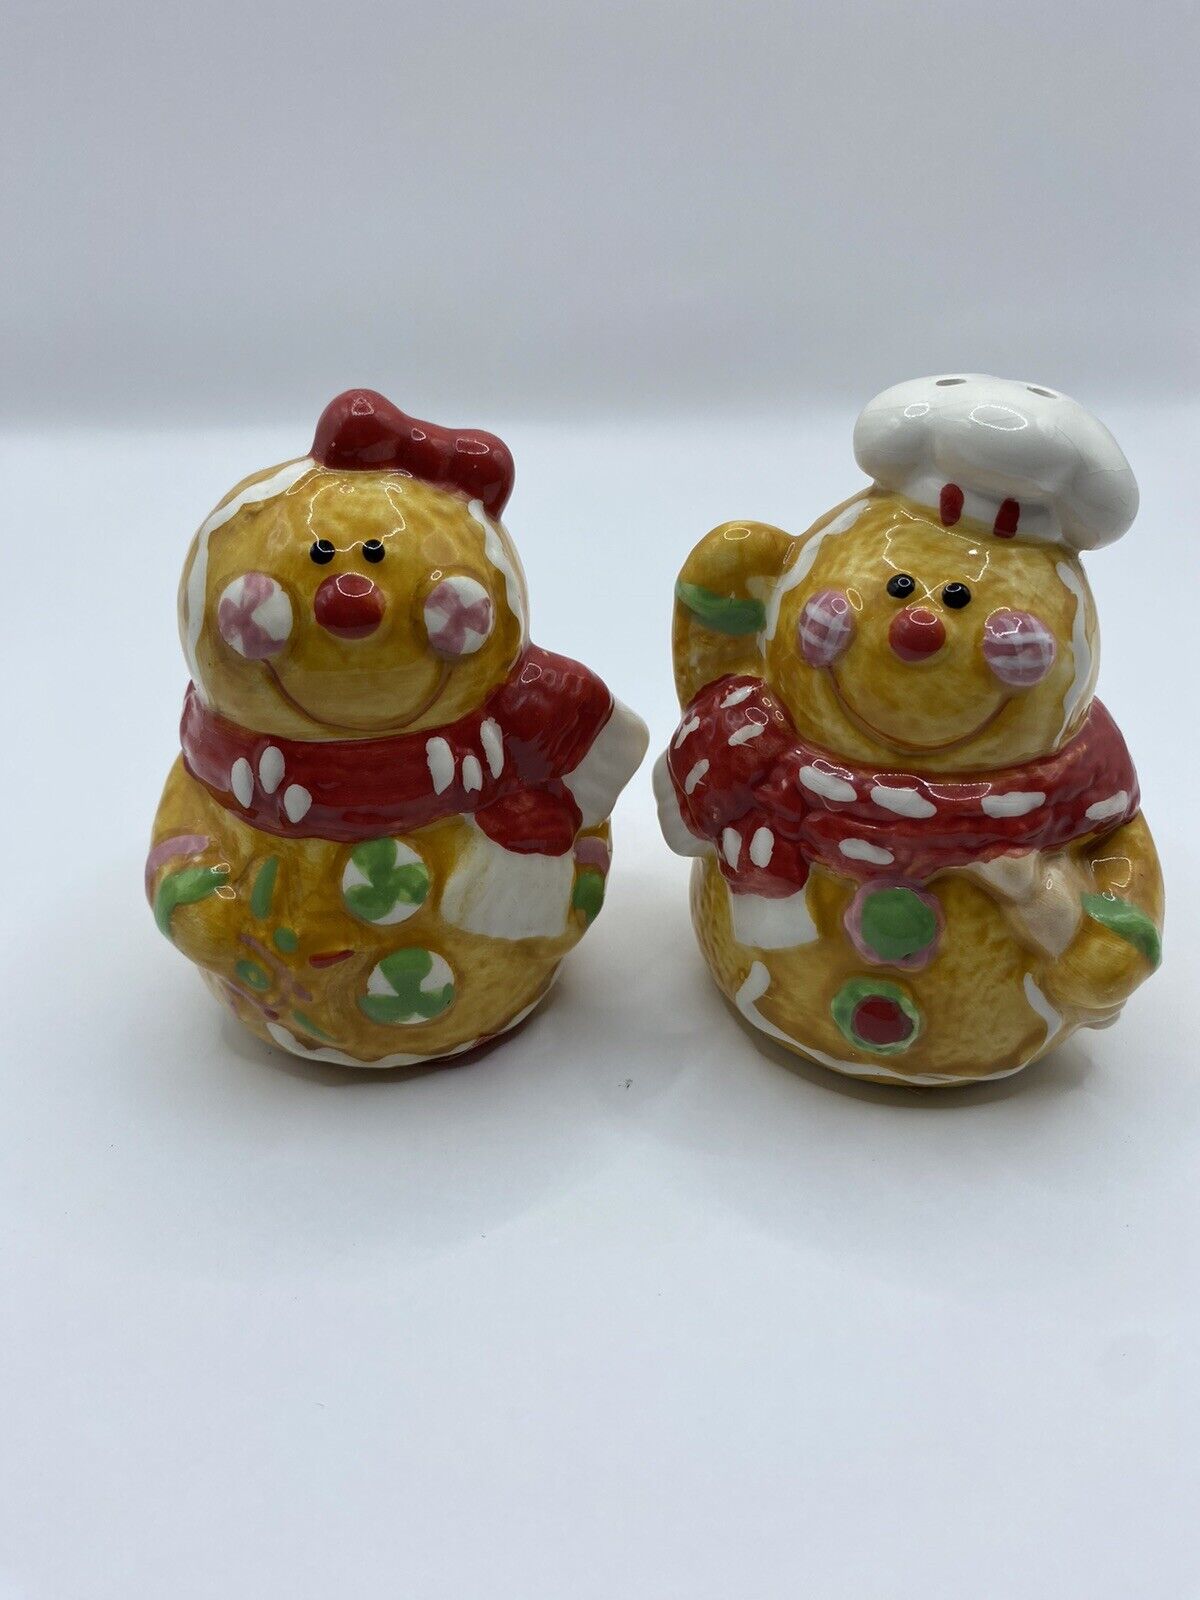 Gingerbread Man Woman Salt & Pepper Shaker Ceramic Christmas Holiday Collectible